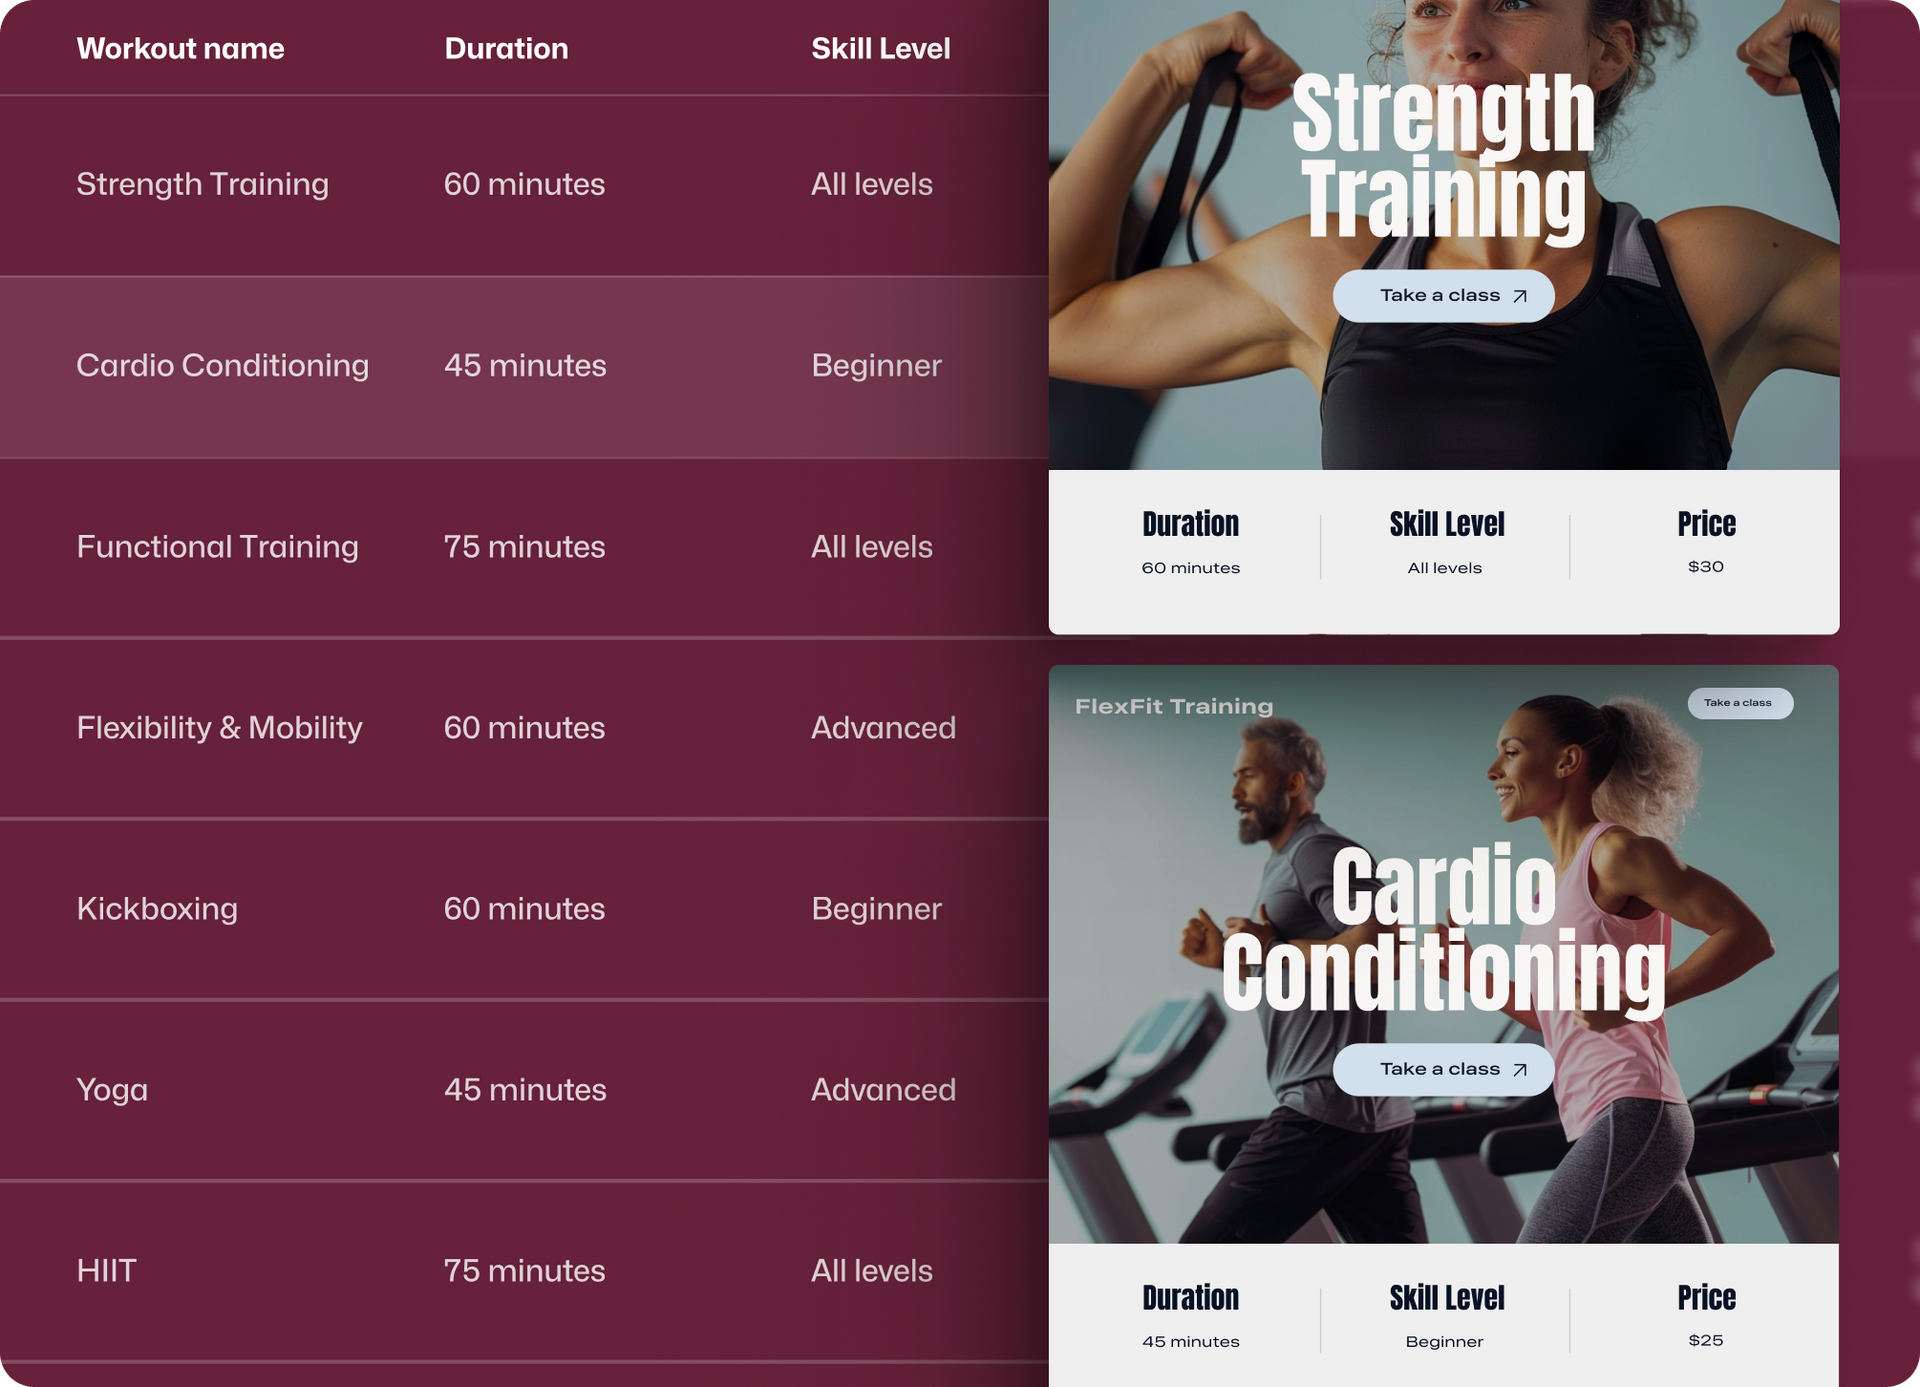 A screenshot of a website for strength training and cardio conditioning.